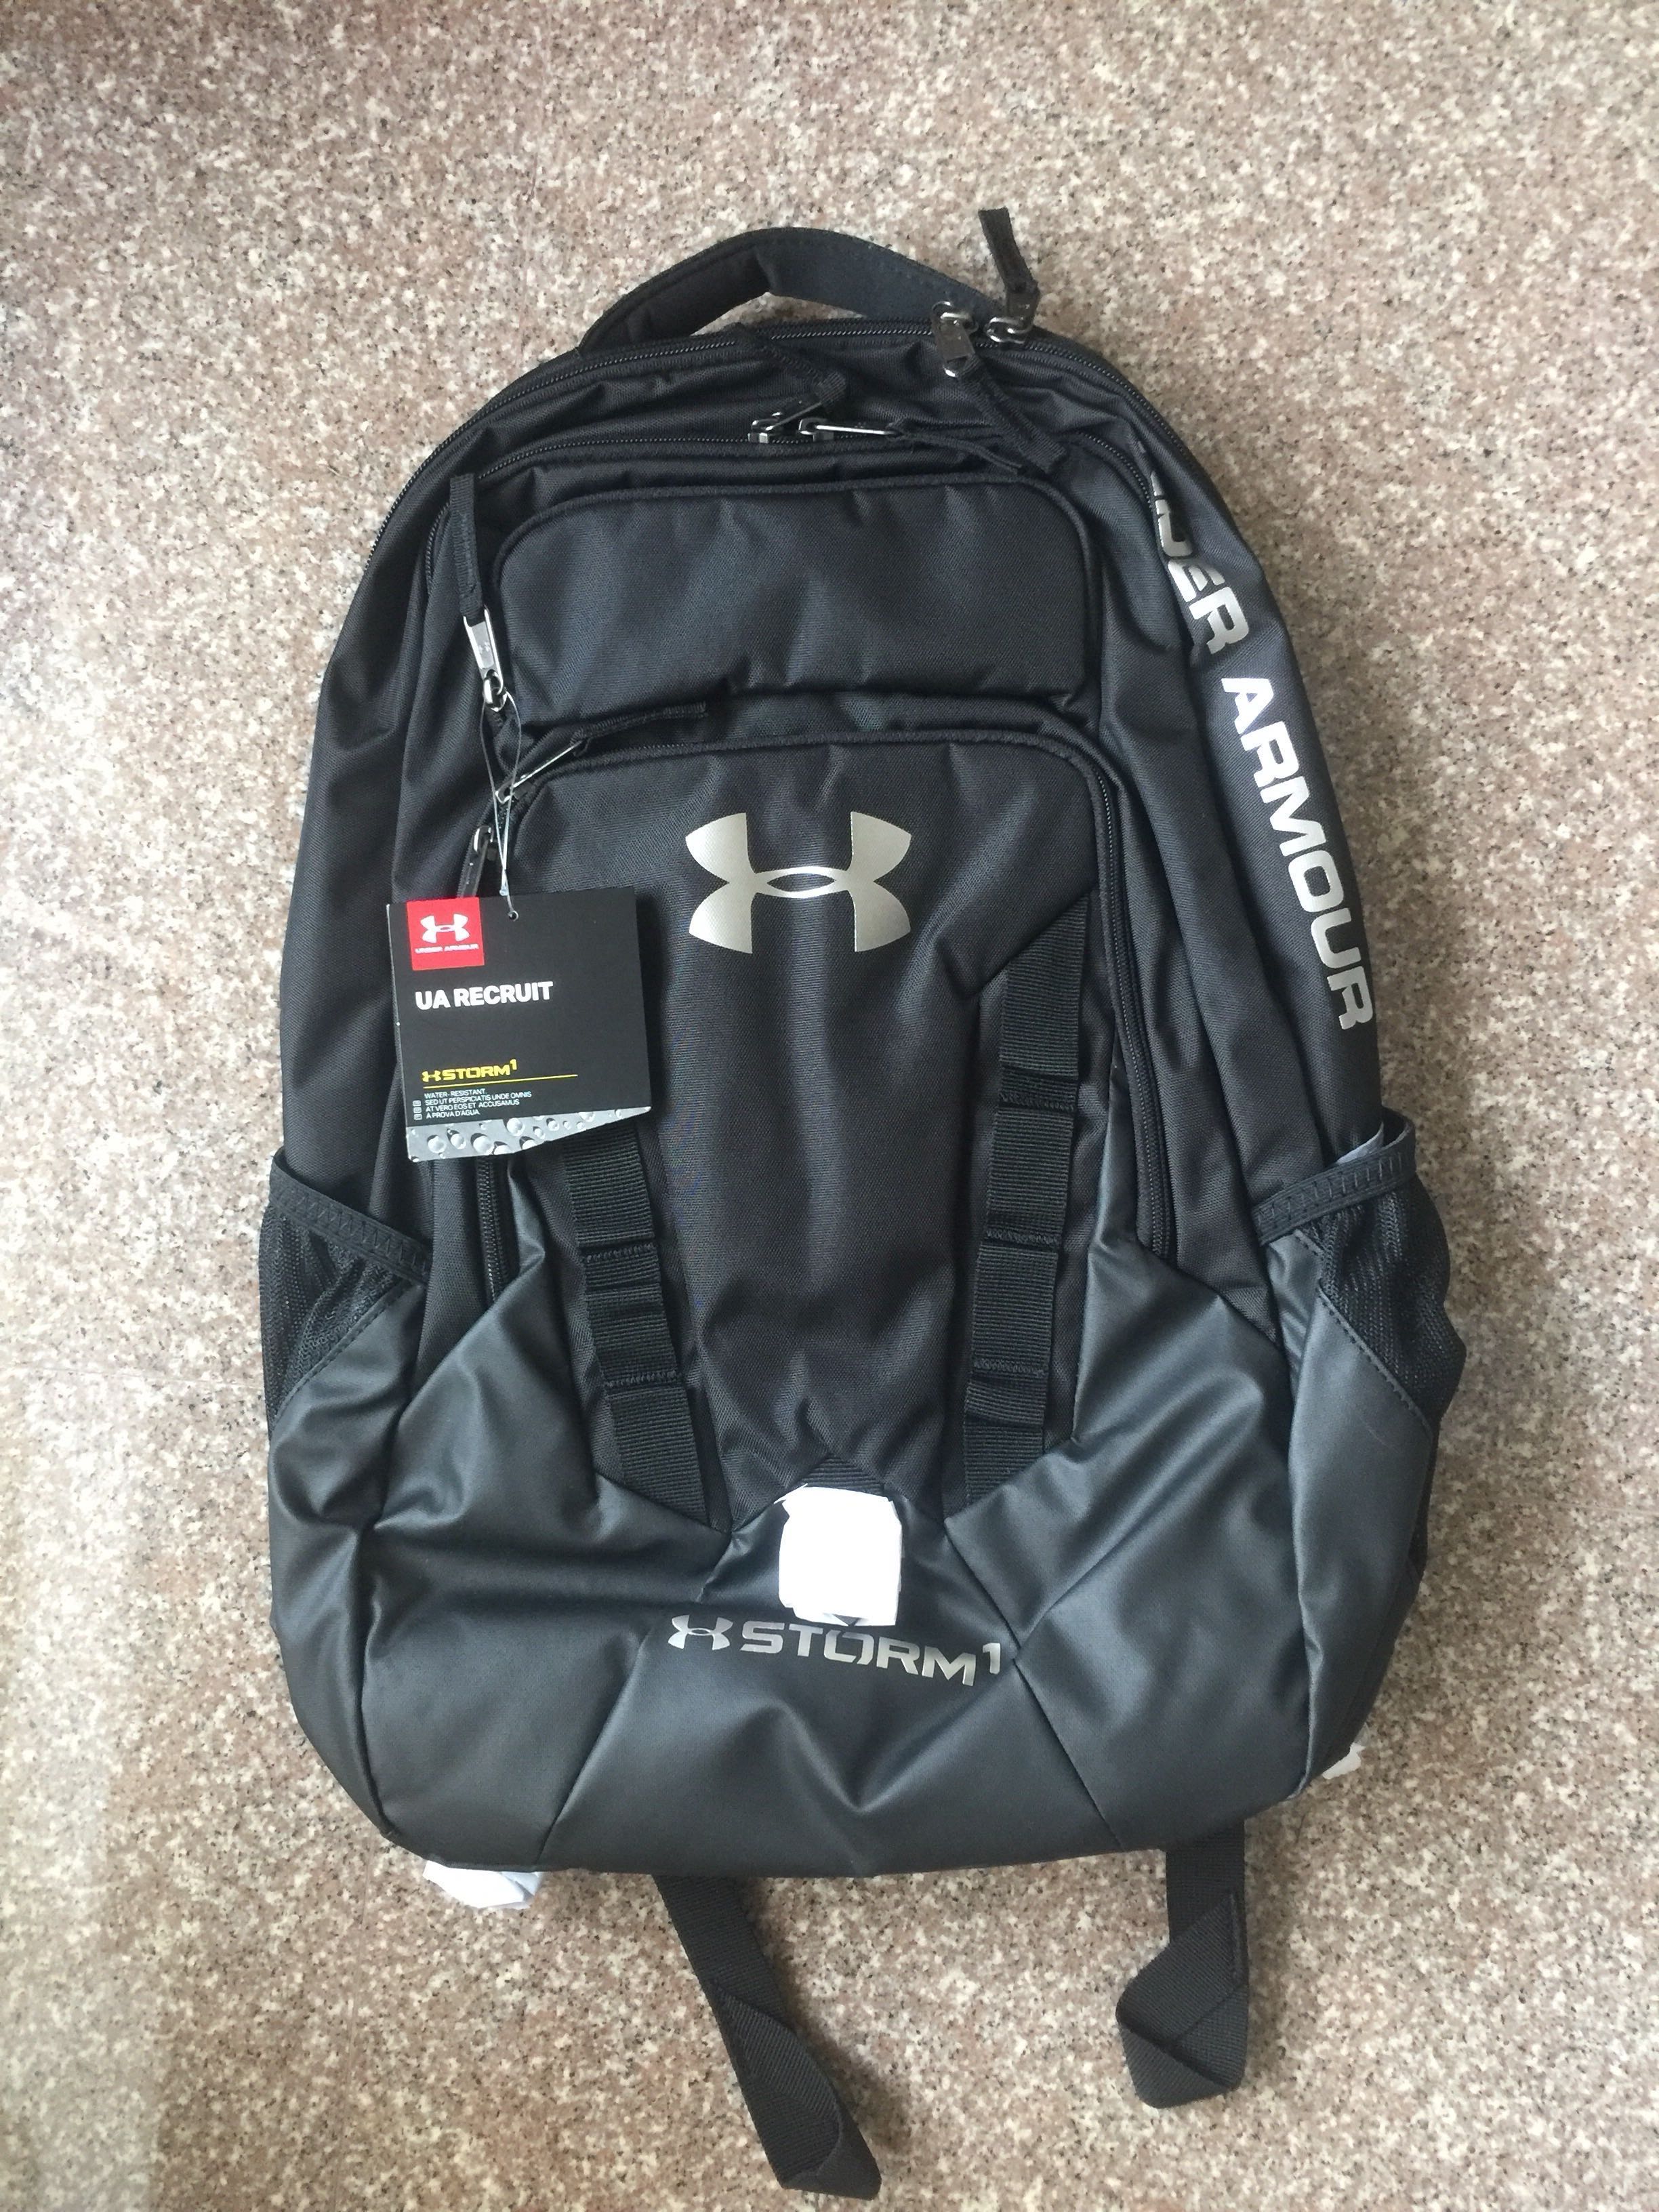 under armour storm 1 backpack amazon